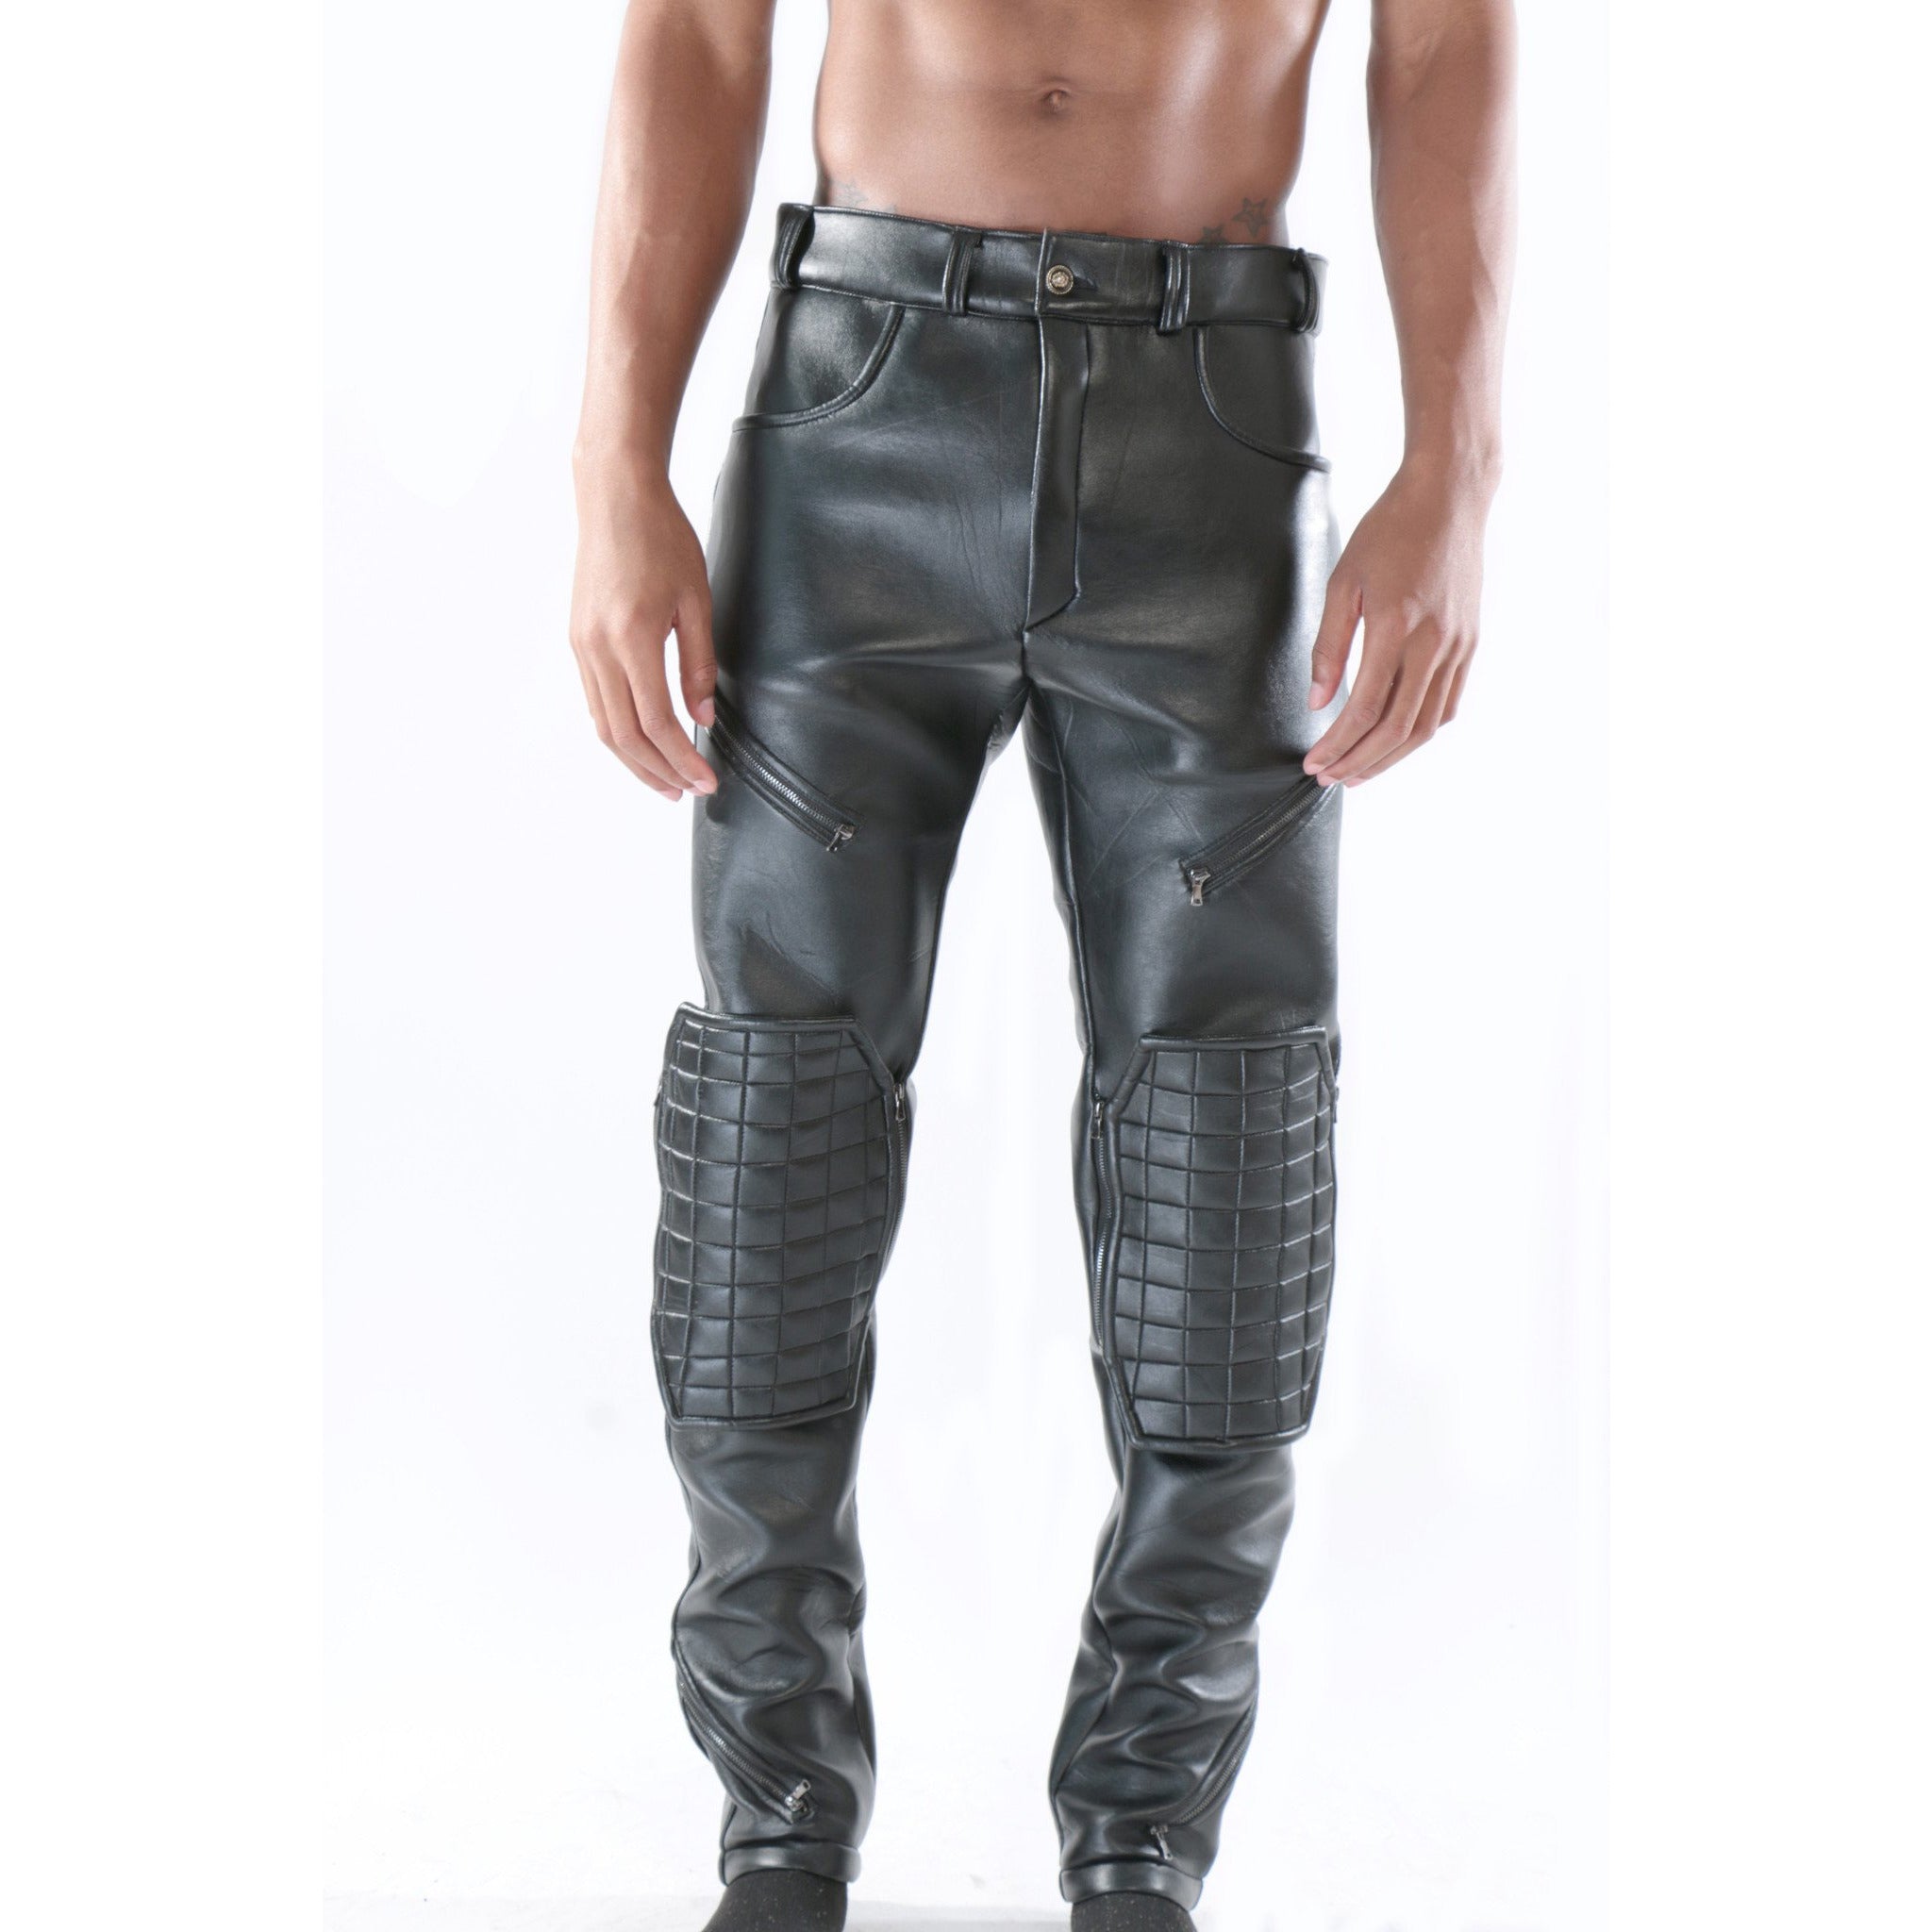 Custom Black leather trouser with removable knee pads